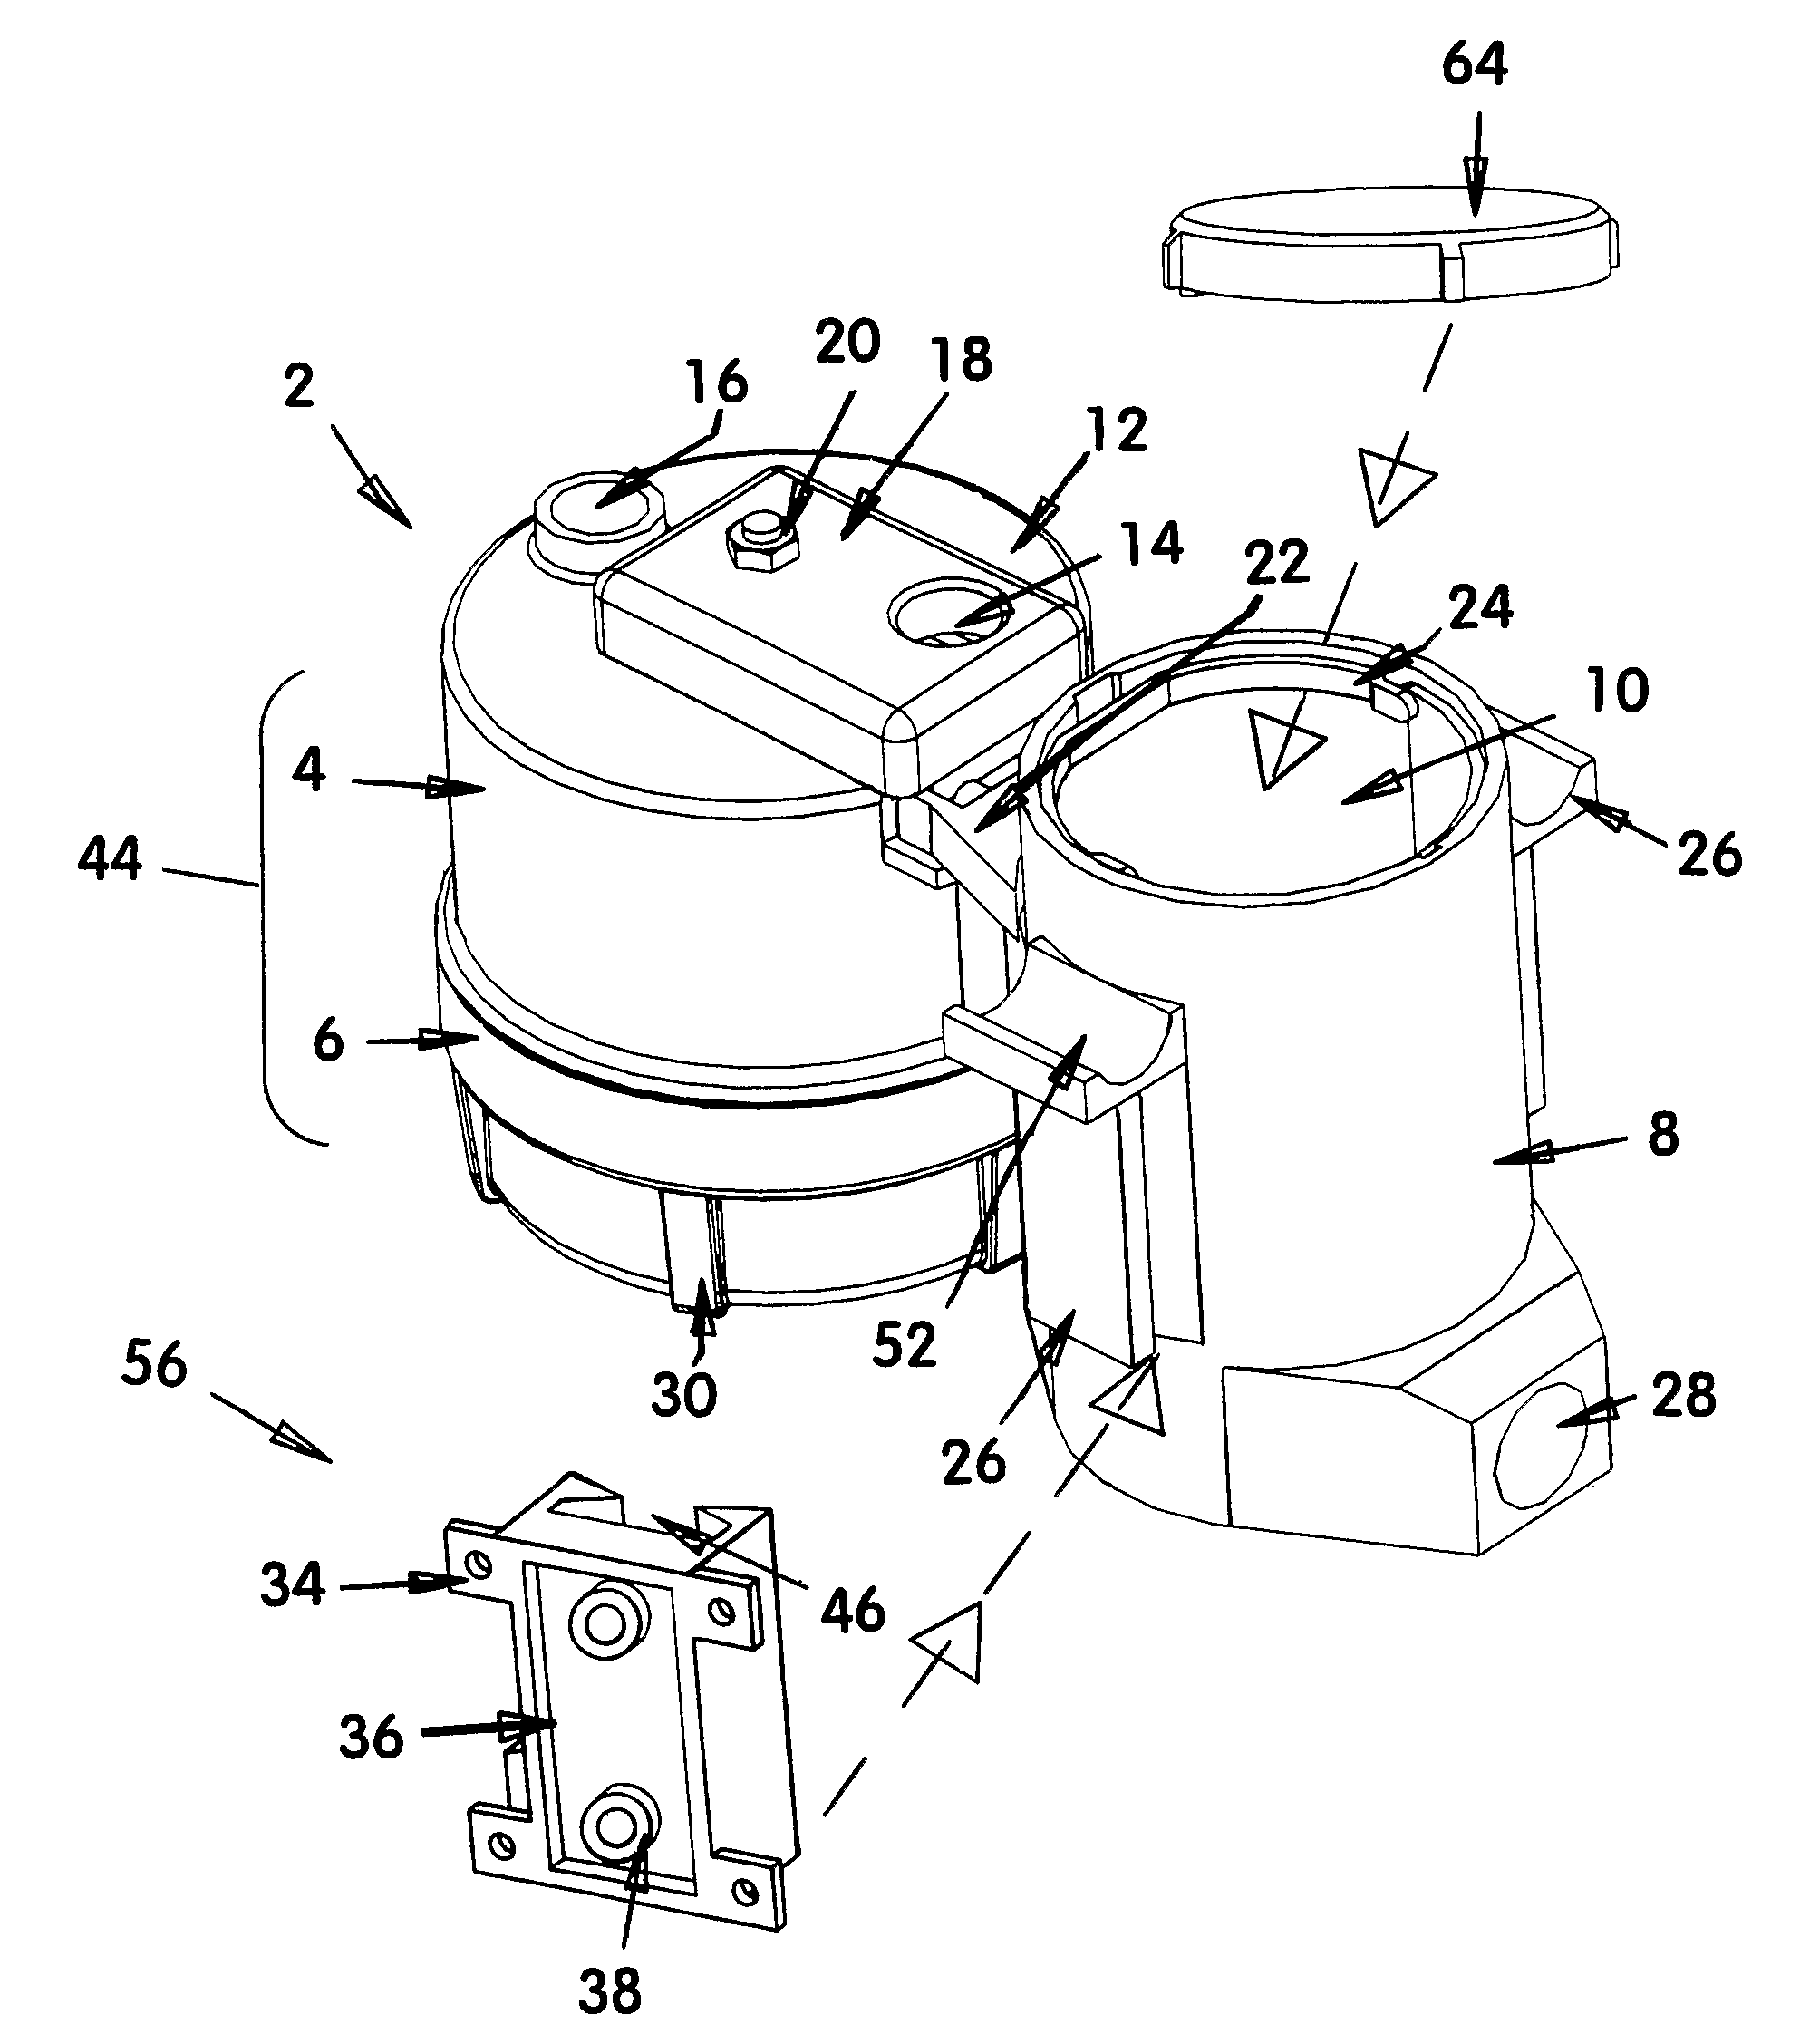 Condensate recovery and treatment system